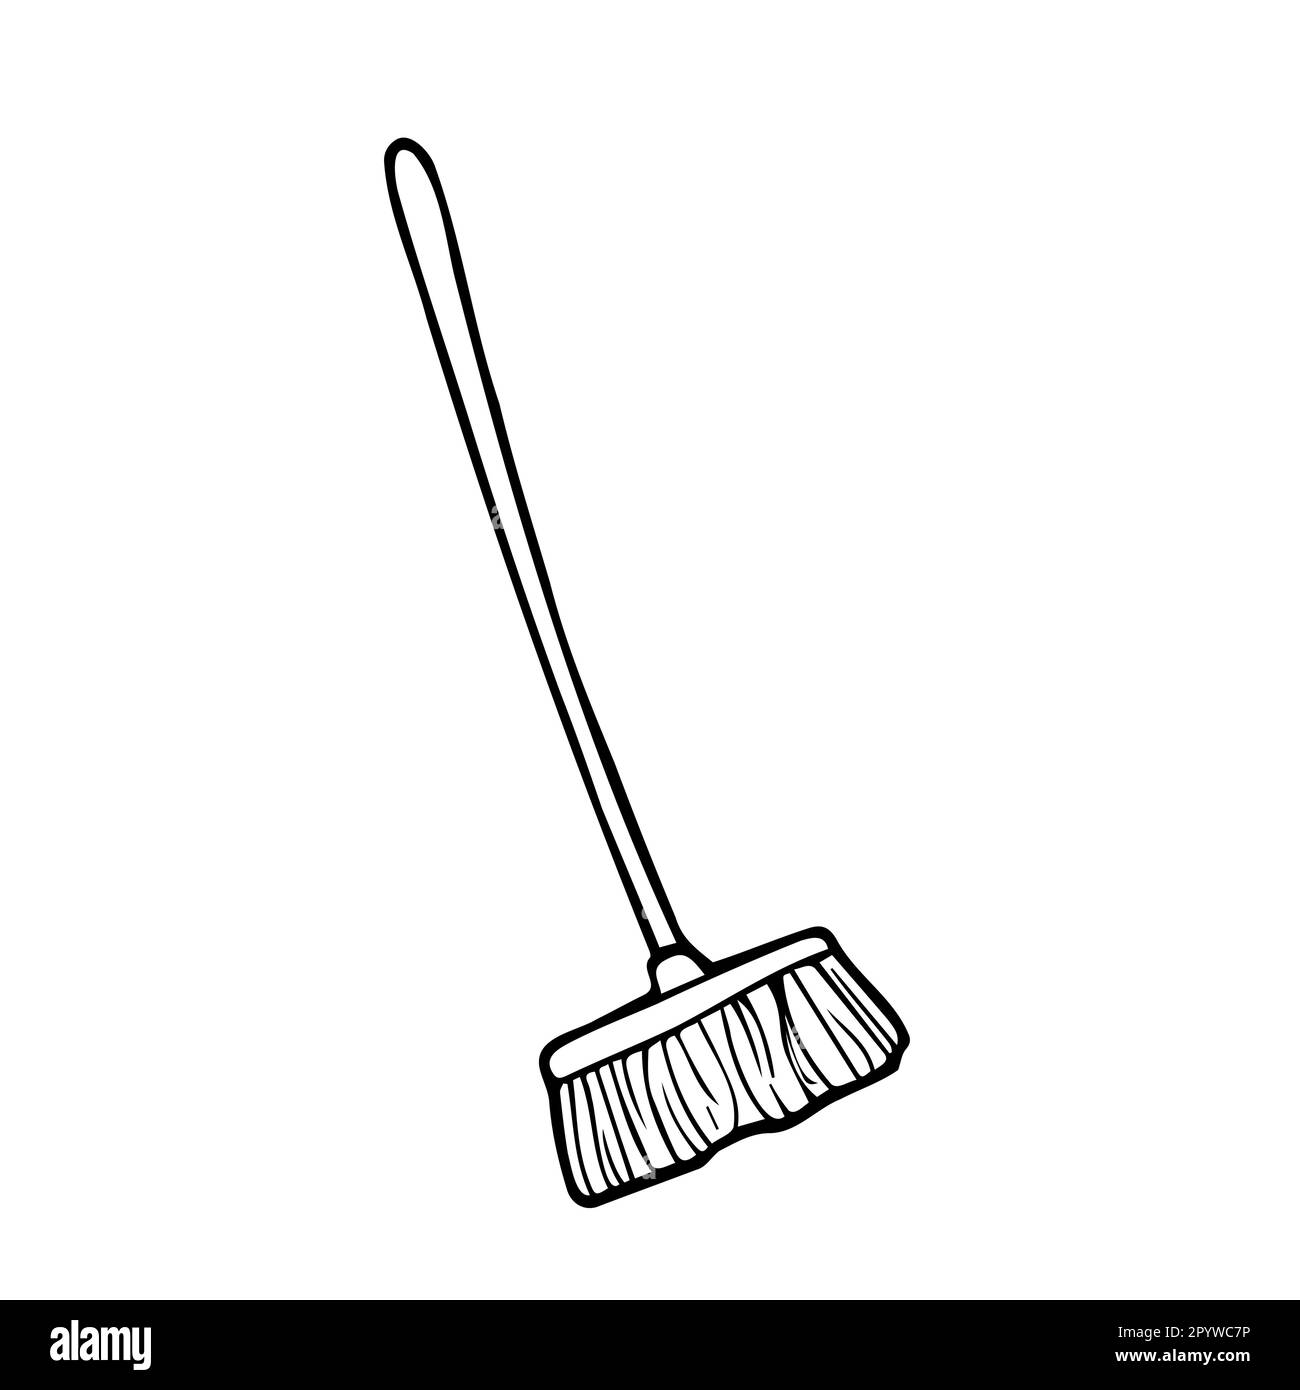 Where can I buy this kind of simple, natural broom? : r/simpleliving